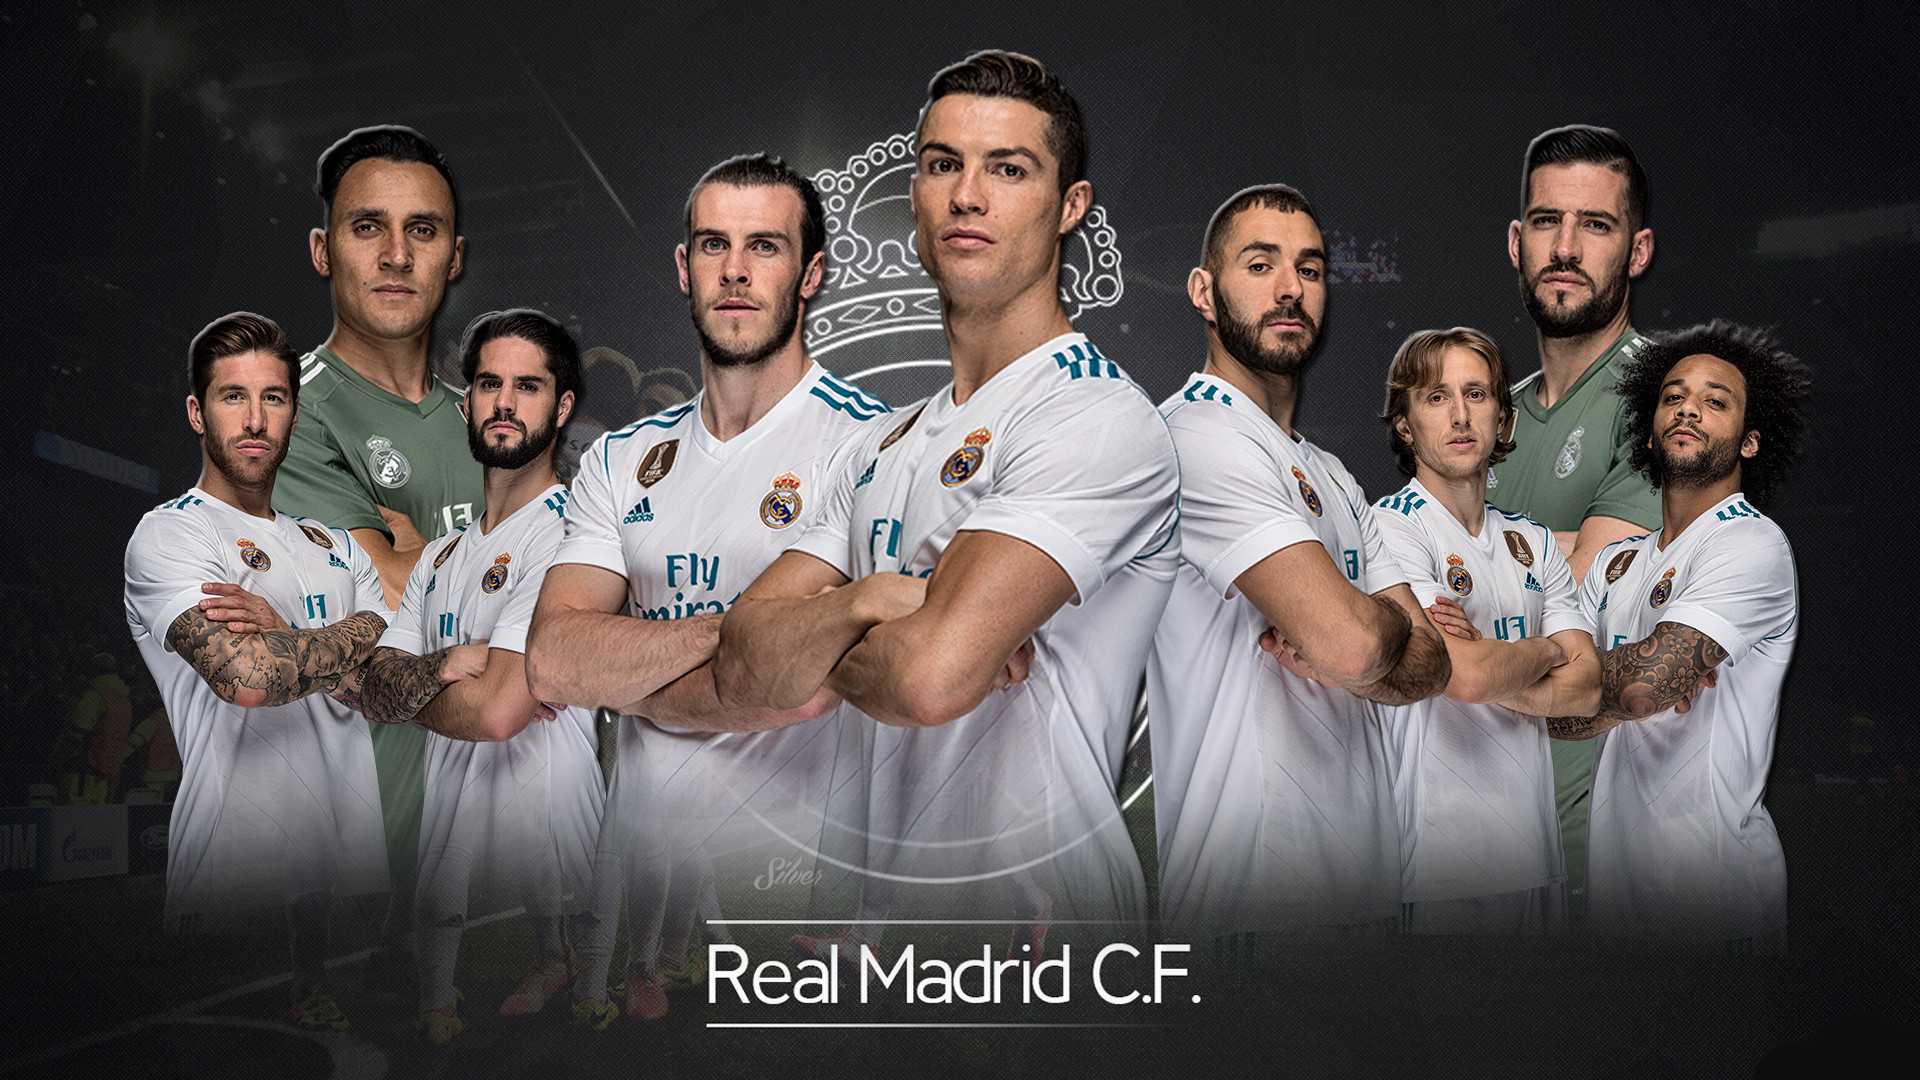 real madrid wallpaper,team,football player,player,championship,soccer player